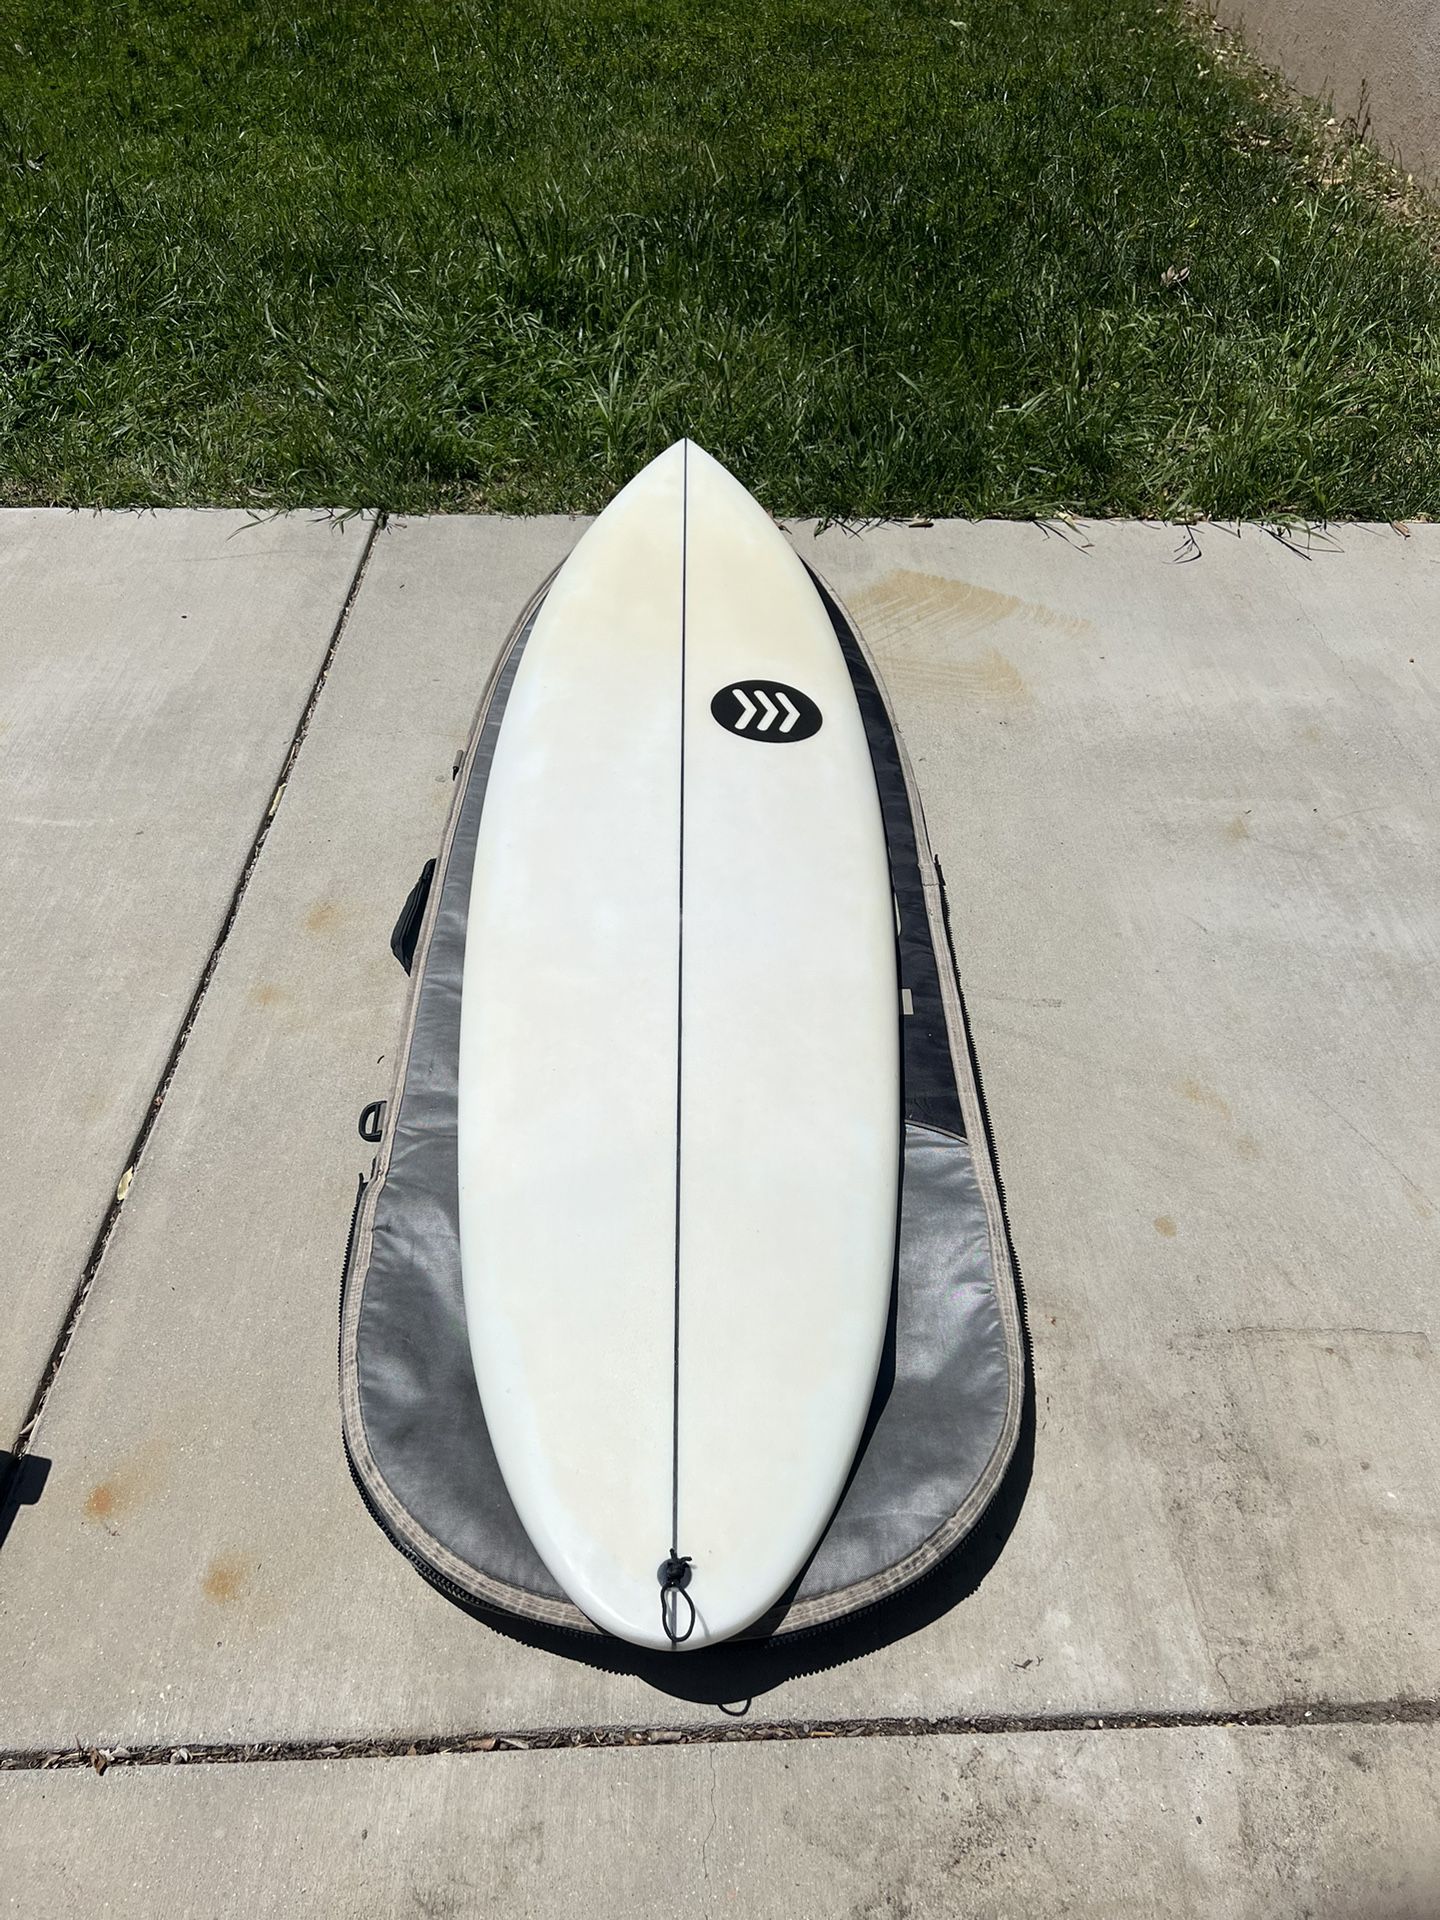 6’8” Mid-Length By Continue surfboards